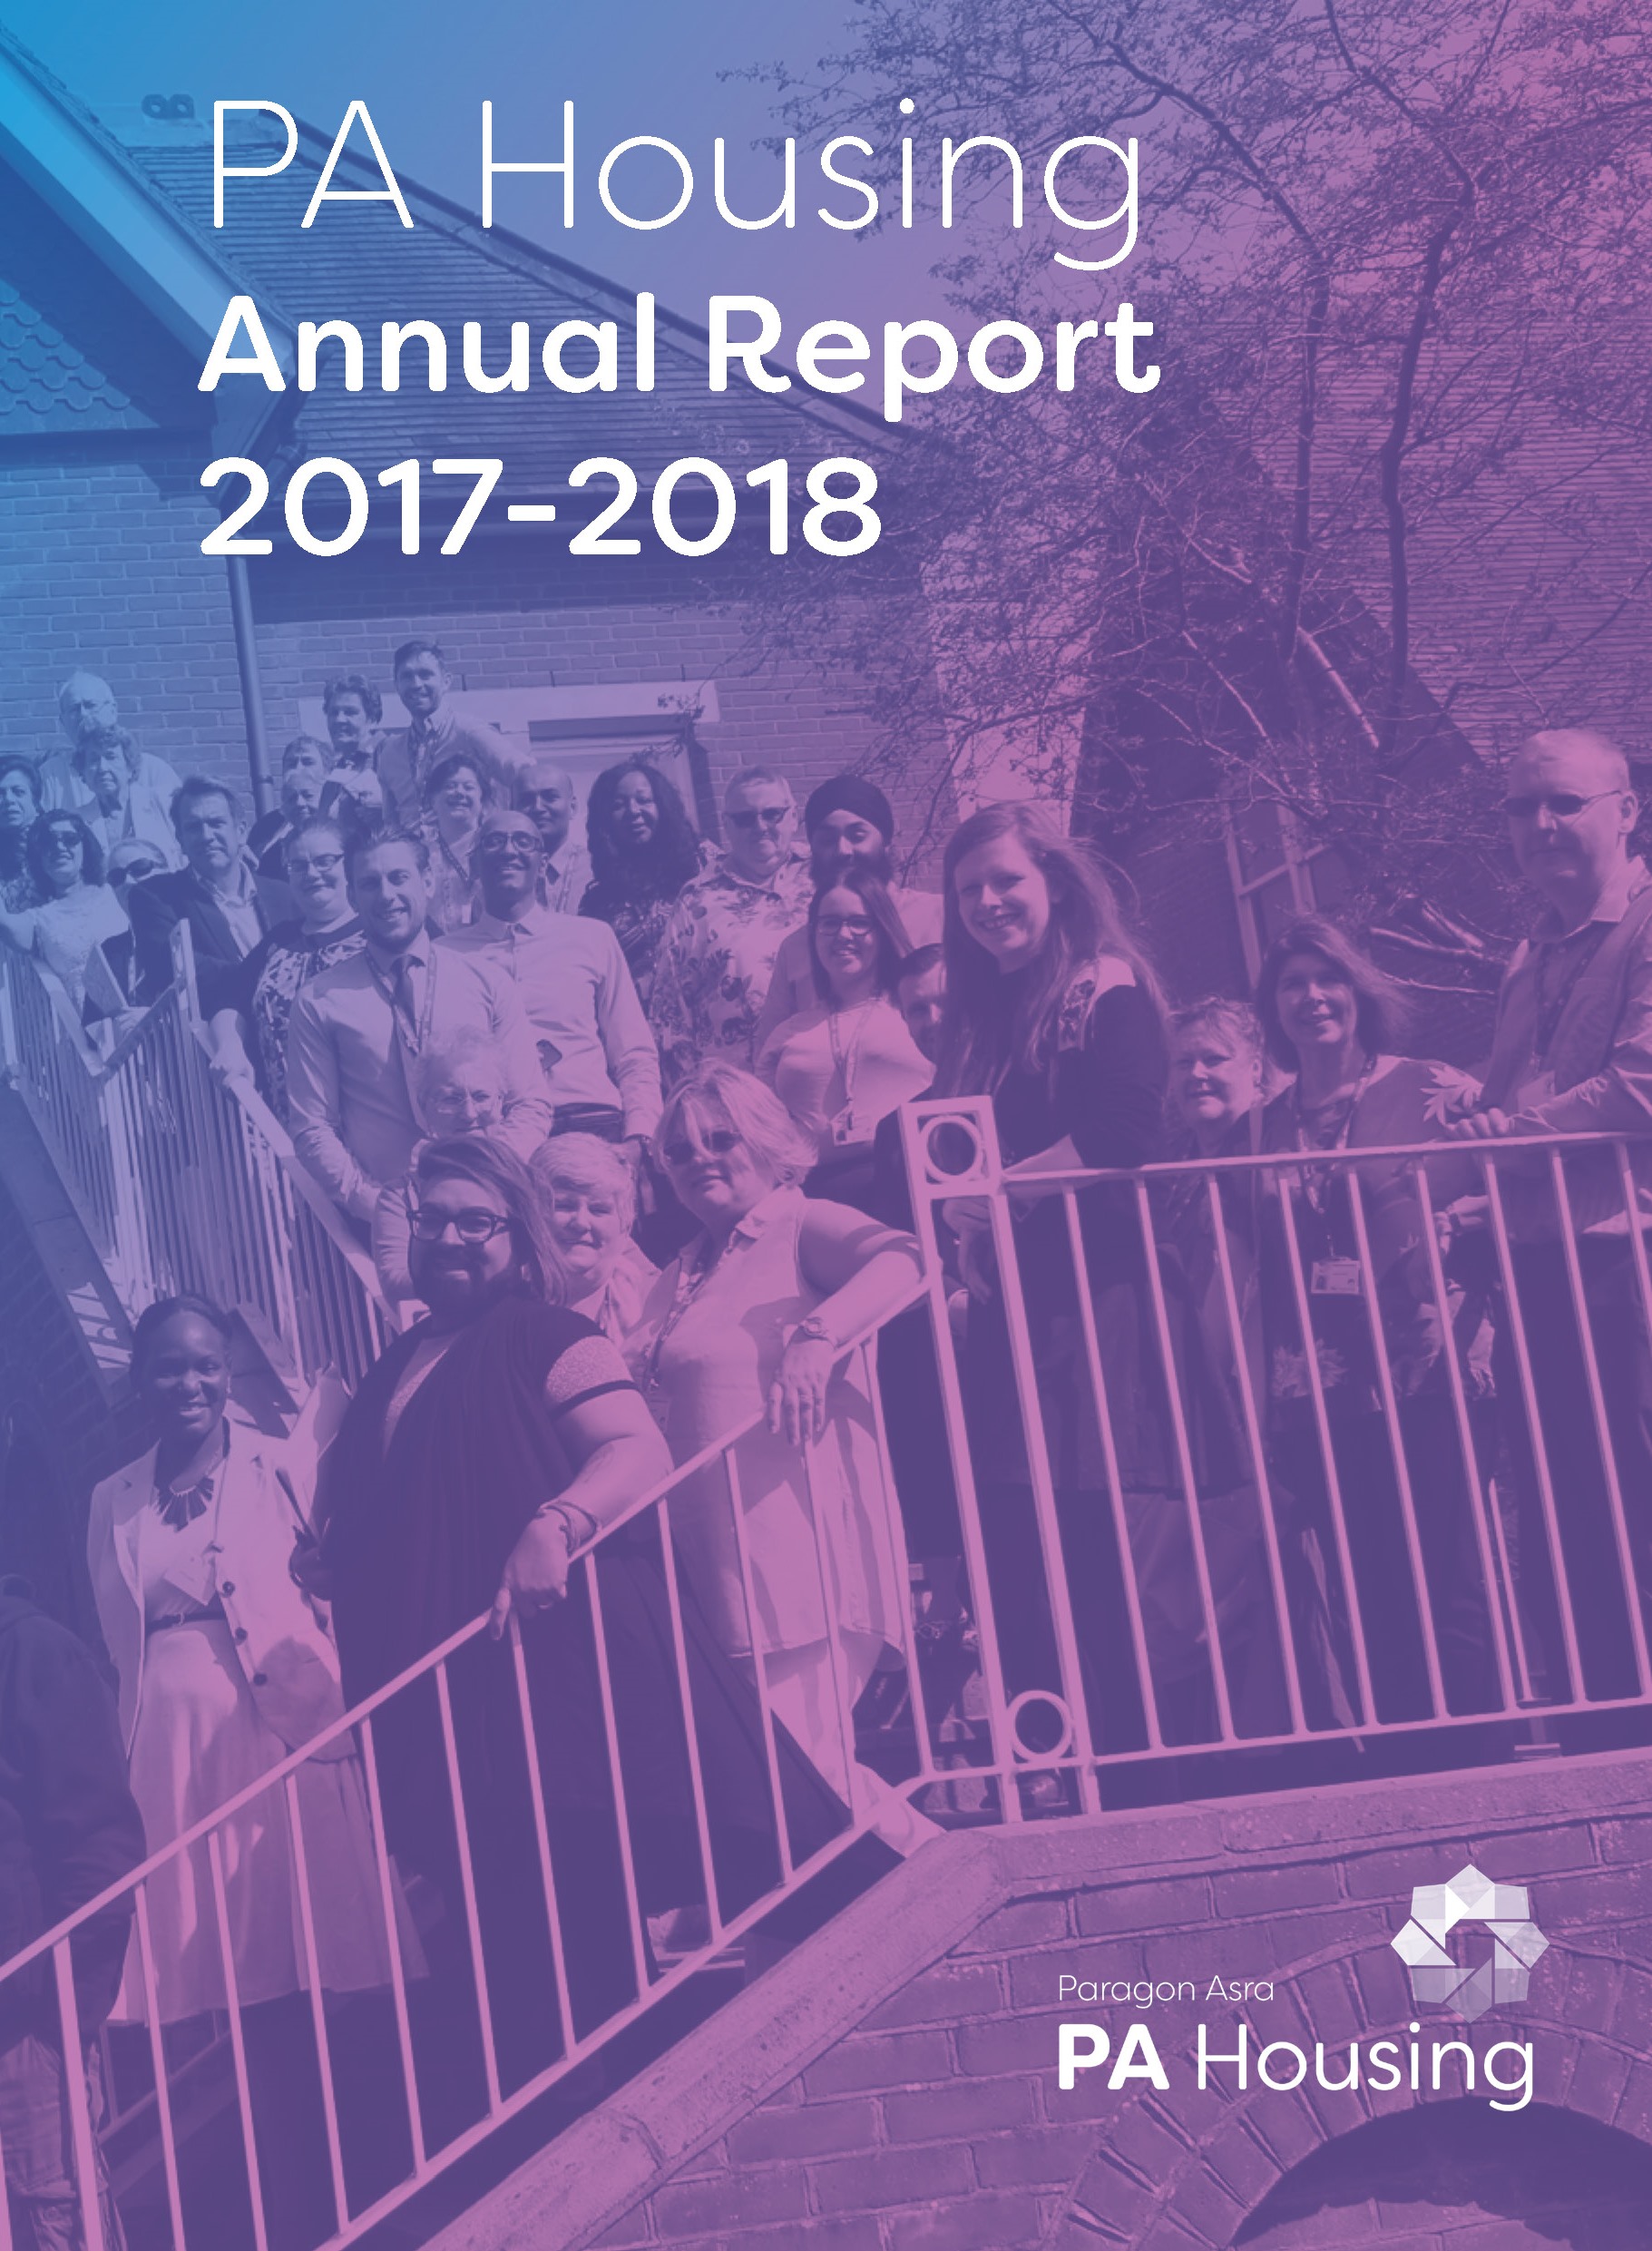 annual-report-2017-18_Page_1.jpg